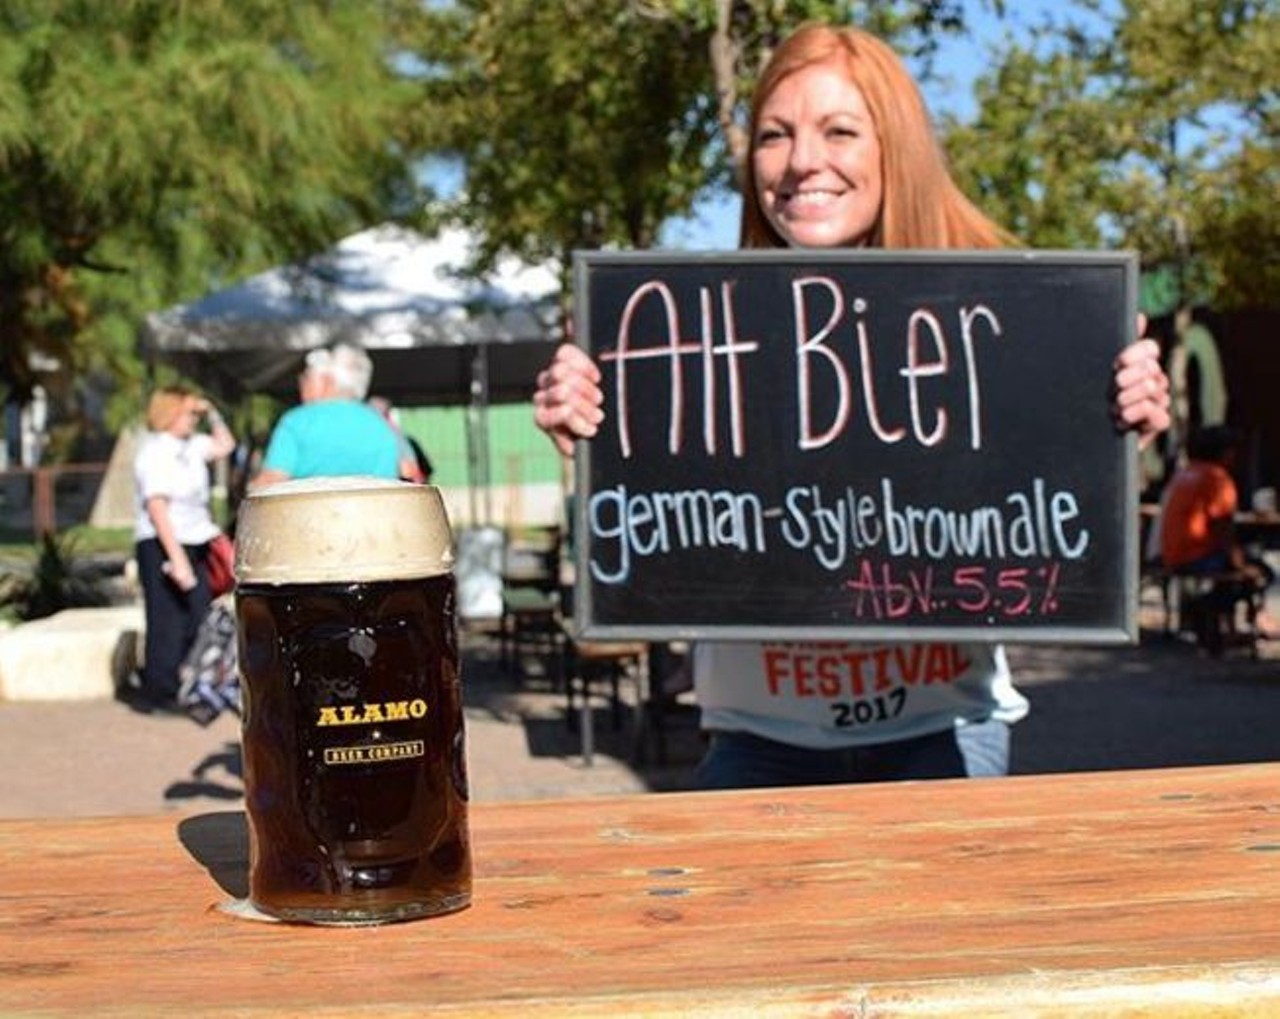 Sept.29-Oct.1, Alamo Beer Company Oktoberfest
415 Burnet St., alamobeer.com
The wait is (almost) over, San Antonio! Get a taste of Germany right here in San Antonio, with German fare and Alamo Beer Company. Live music from TubaMeisters,
Ennis Czech Boys and Klein Steins will keep you in the spirit across this three-day fest.
Photo via Instagram, alamobeerco